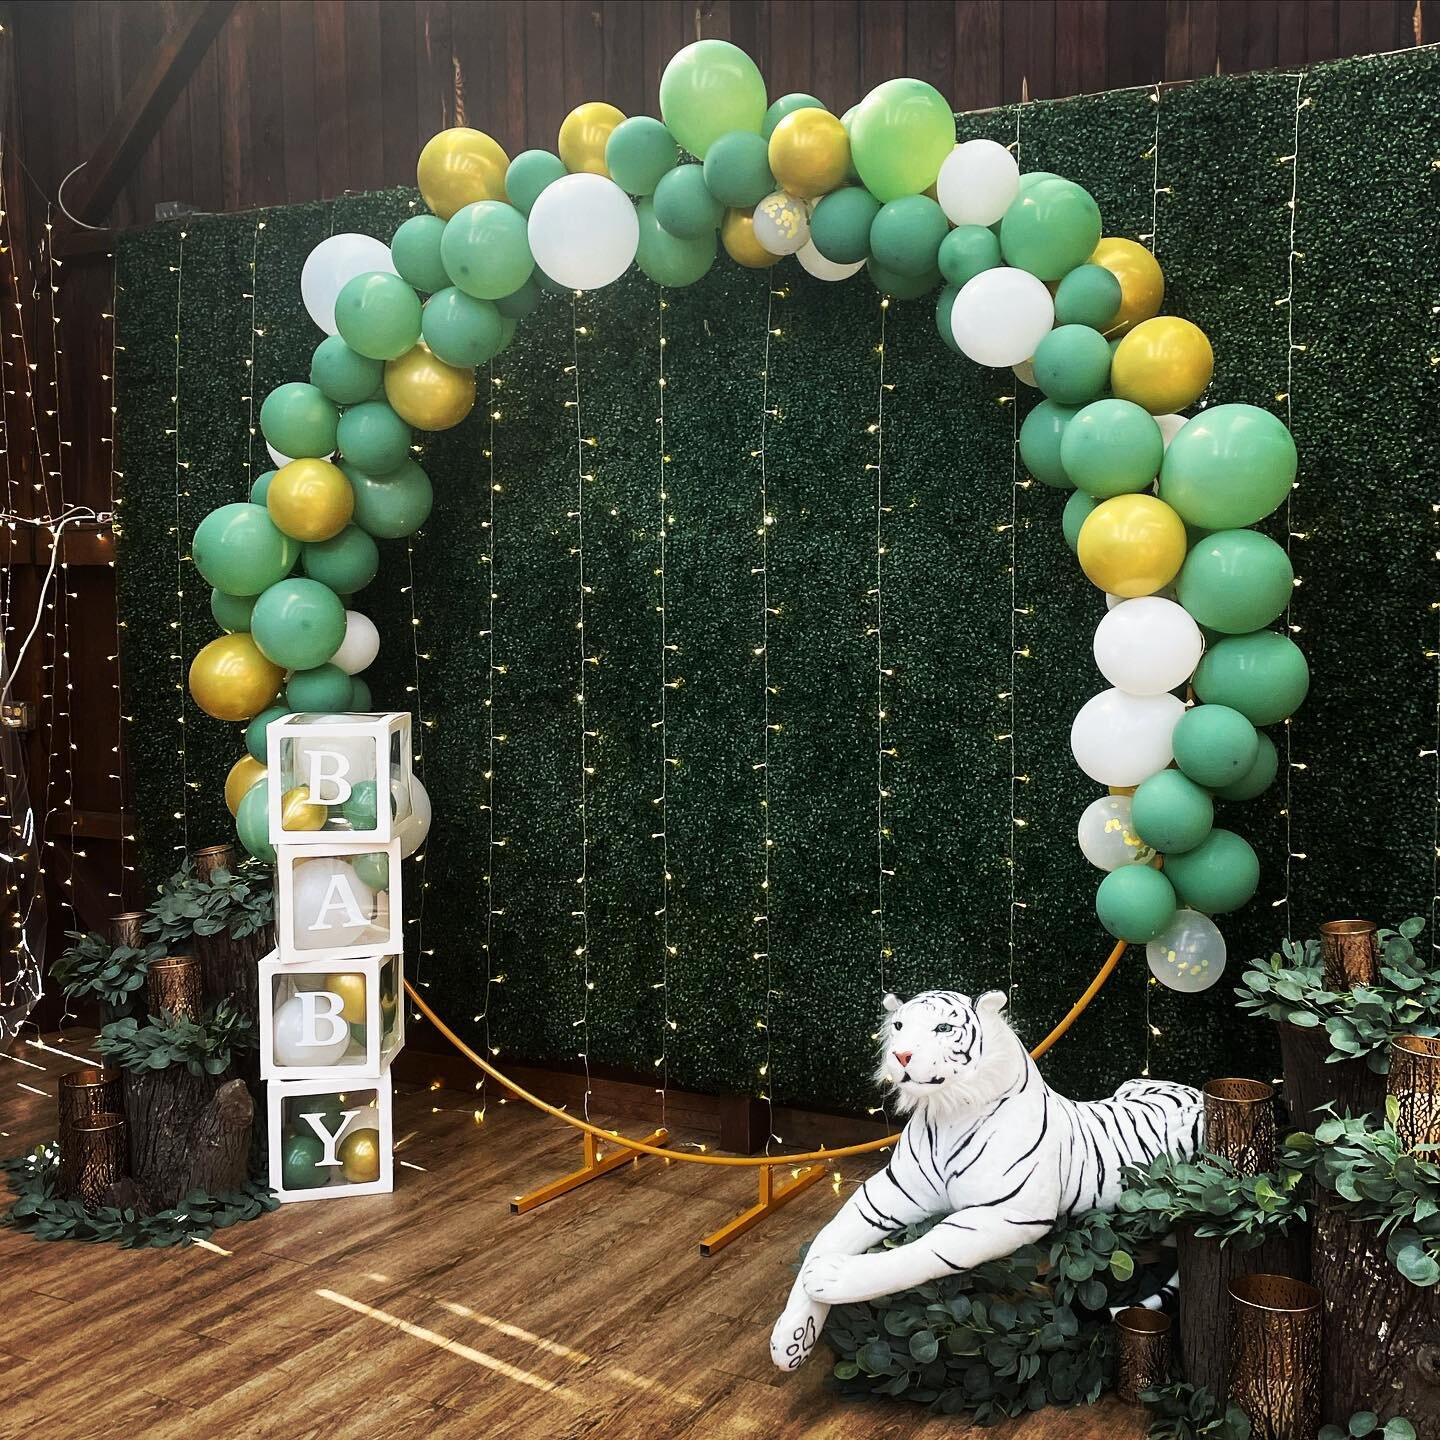 Jungle Baby Showers in our barn are perfect for balloon arches 🌿🐅🦓
One of our many decor add ons available in house!
#babyshower #babyshowerideas #jungletheme #junglethemeparty #event #telfordballoons #telfordbusiness #barn #barnvenue #montgomeryc